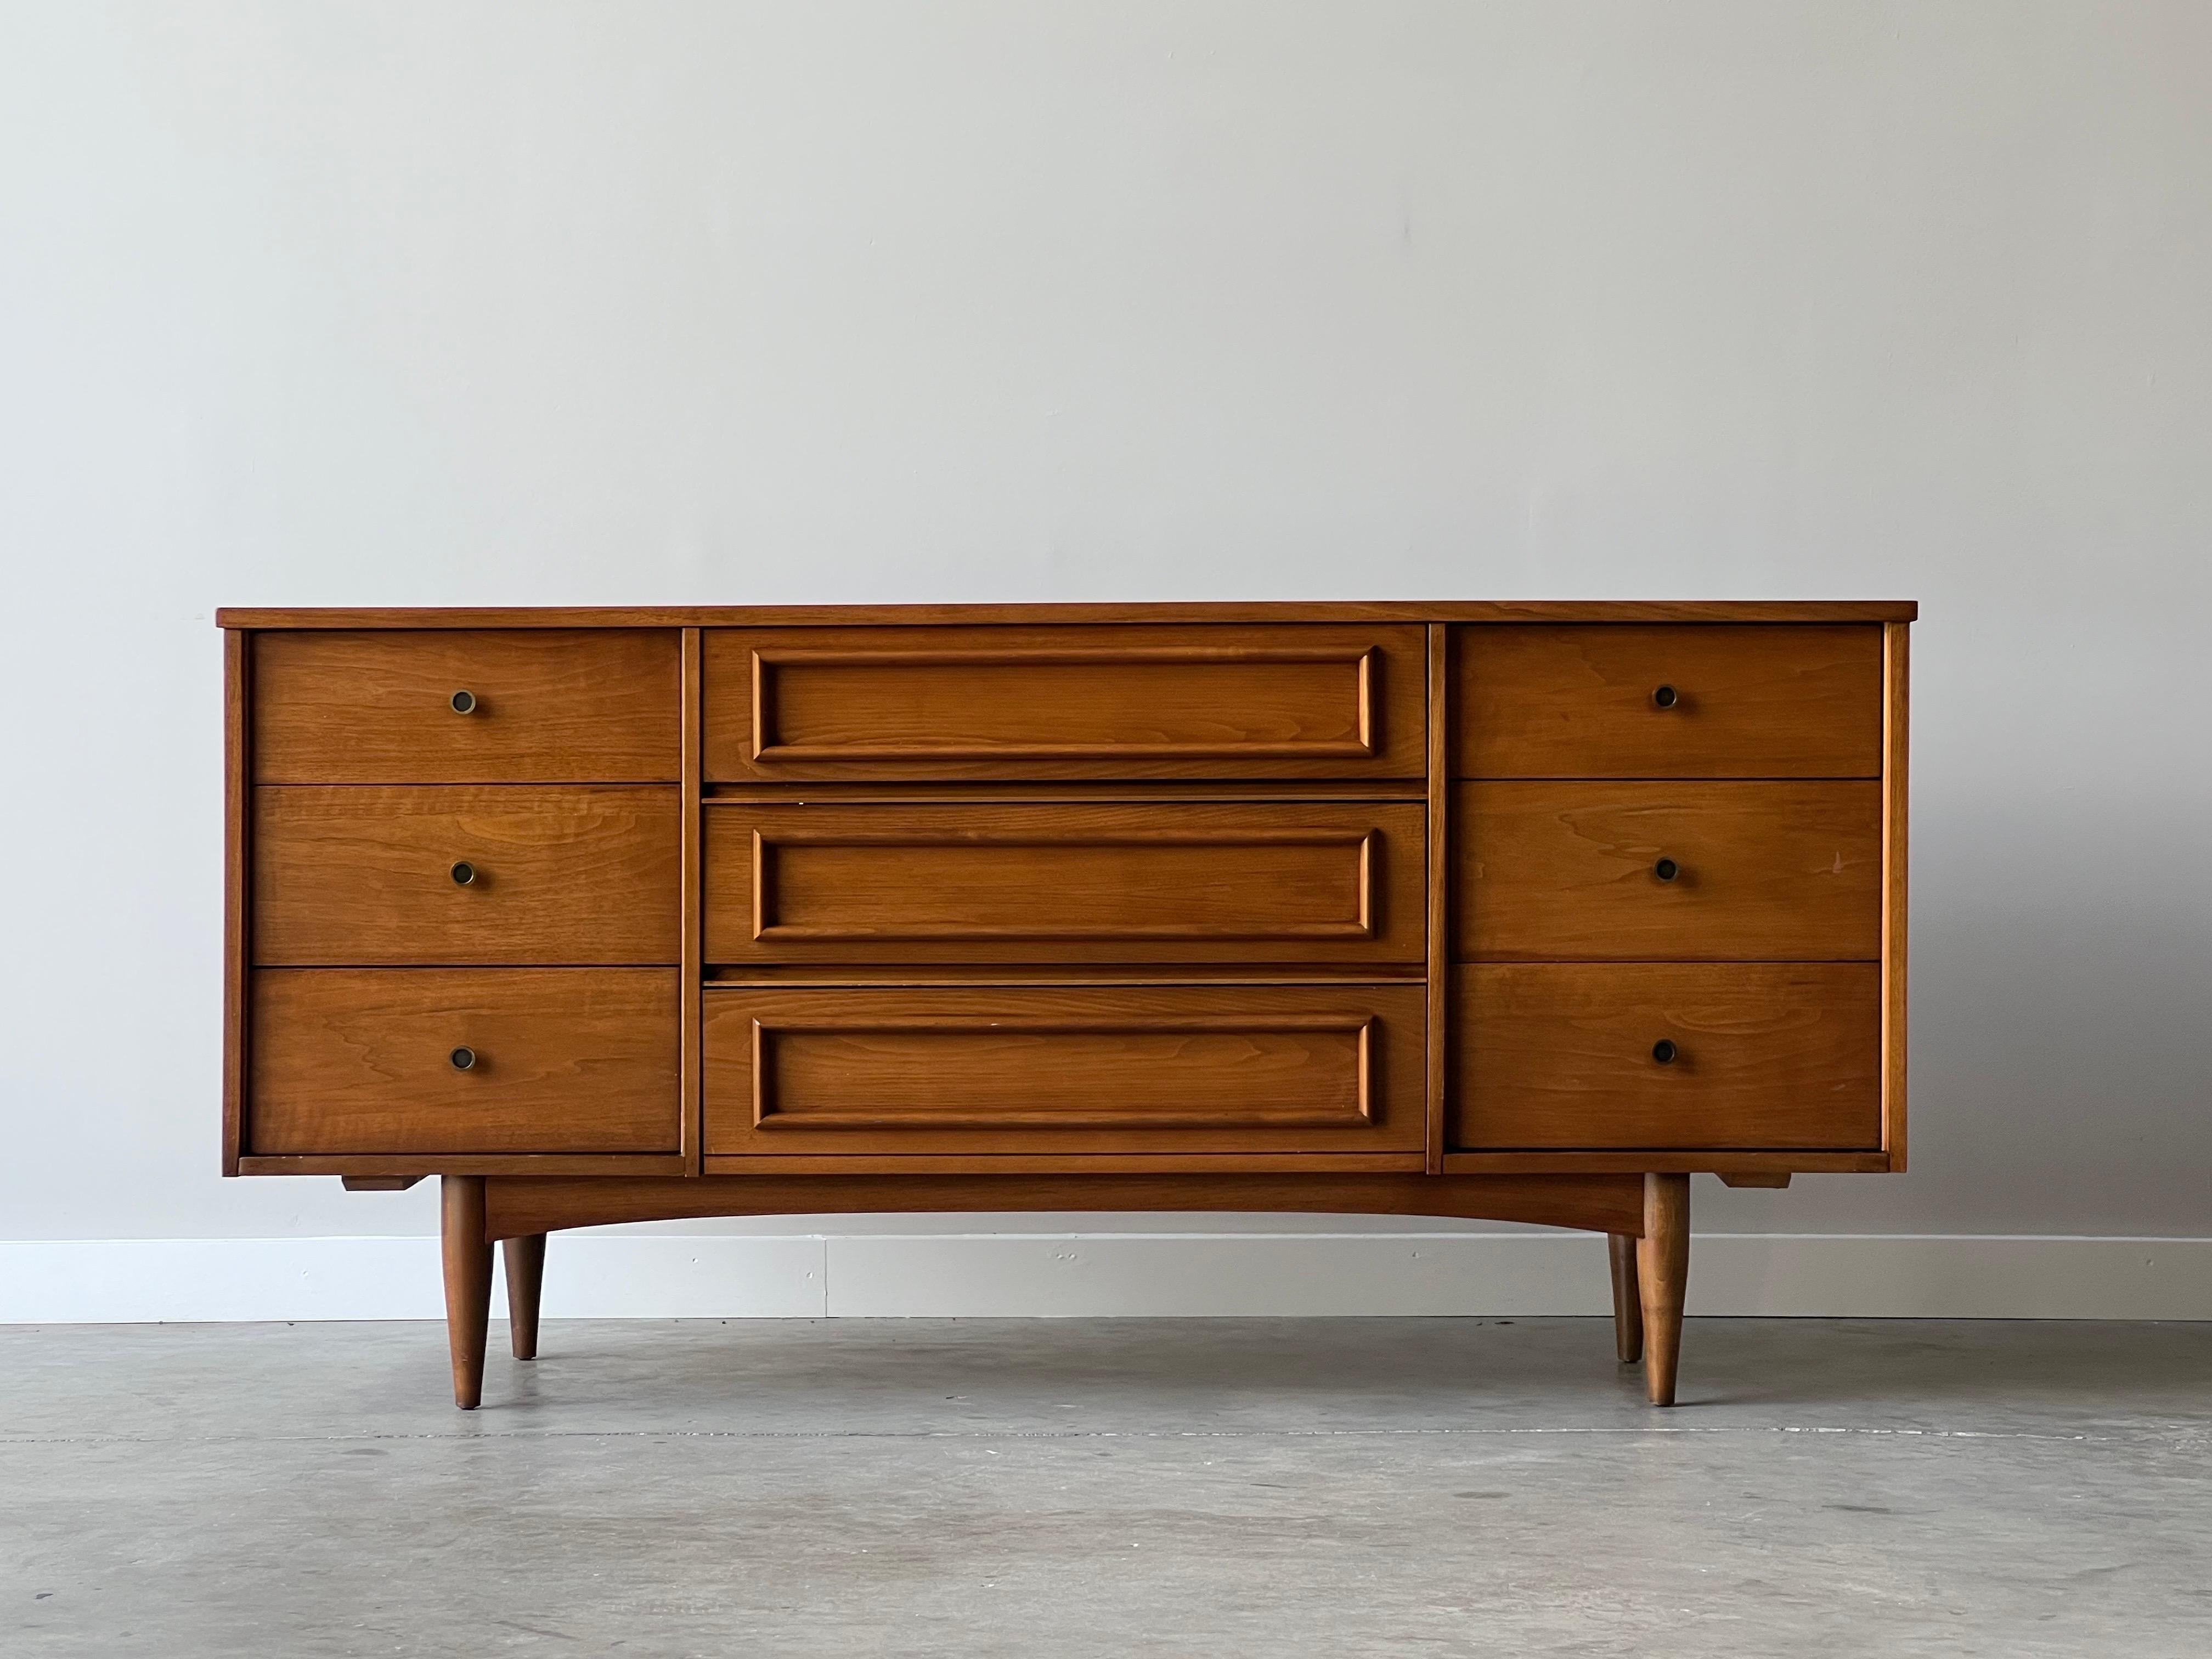 Mid century modern walnut 9 drawer dresser with wonderful details throughout. Brass and black enamel circular pulls, tapered legs, arched base, and sculpted bordered middle drawers. There’s not much to not love. Recently refinished and only showing